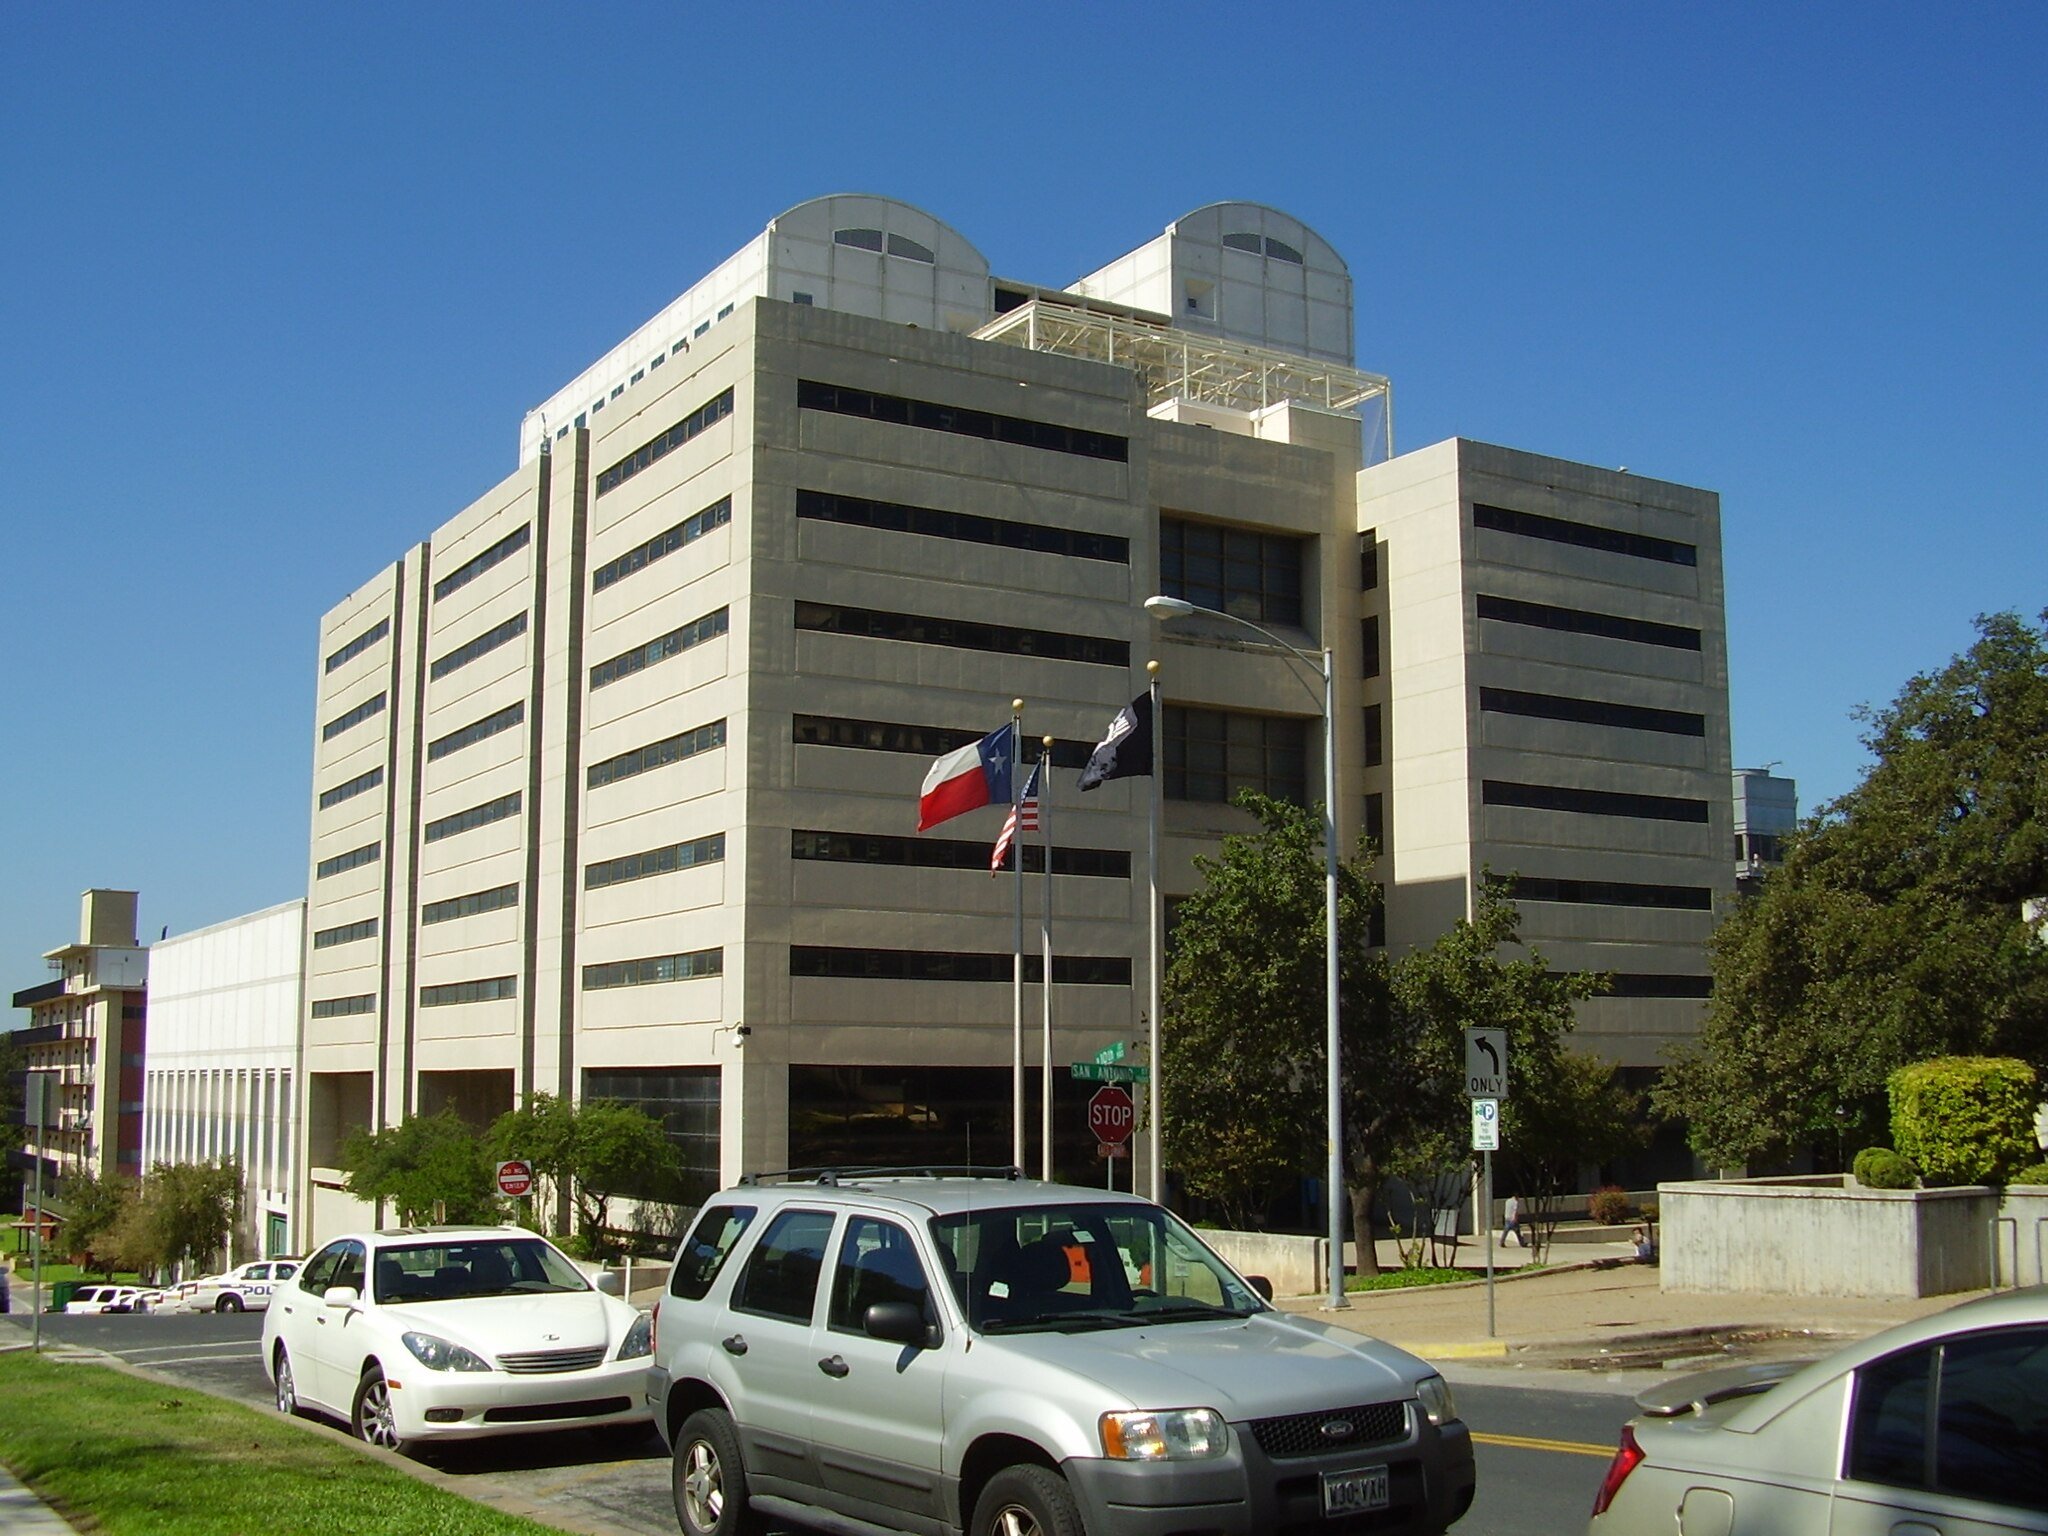 A photo of the exterior of the Travis County Jail in Austin.